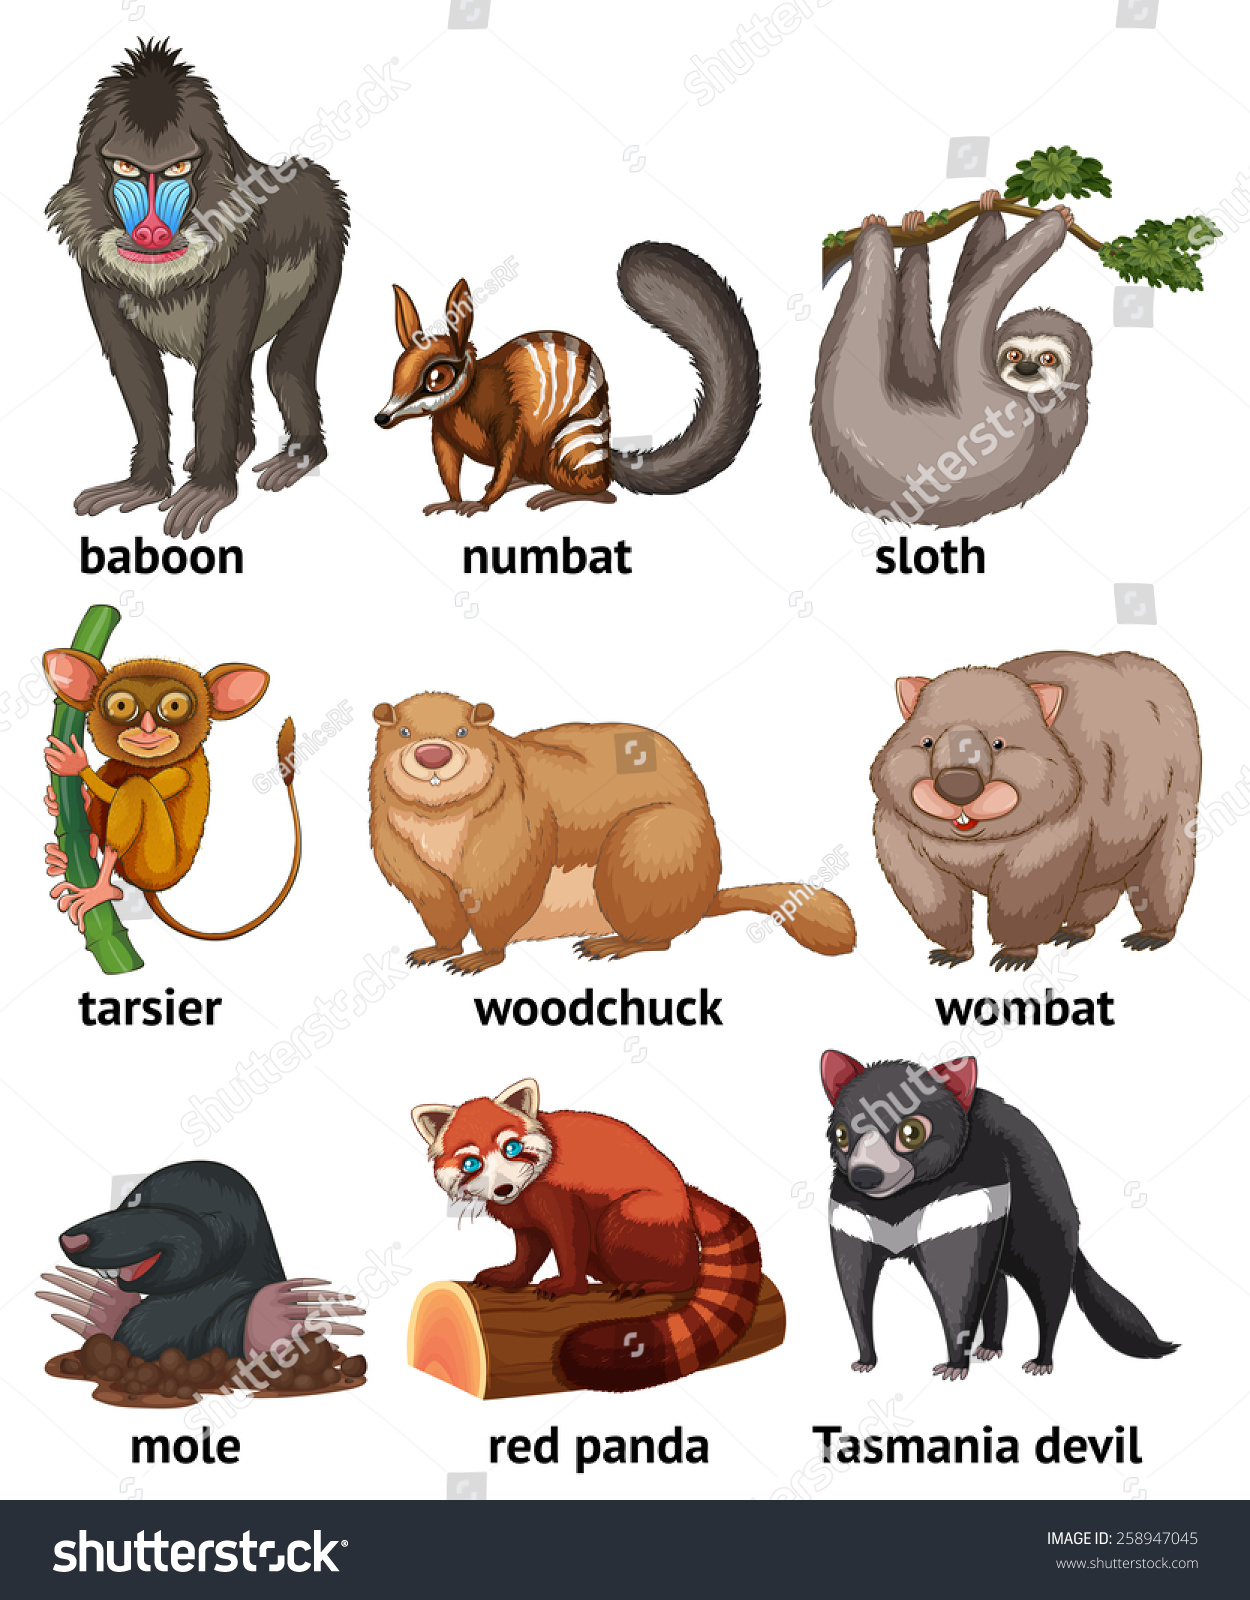 clipart of different animals - photo #49